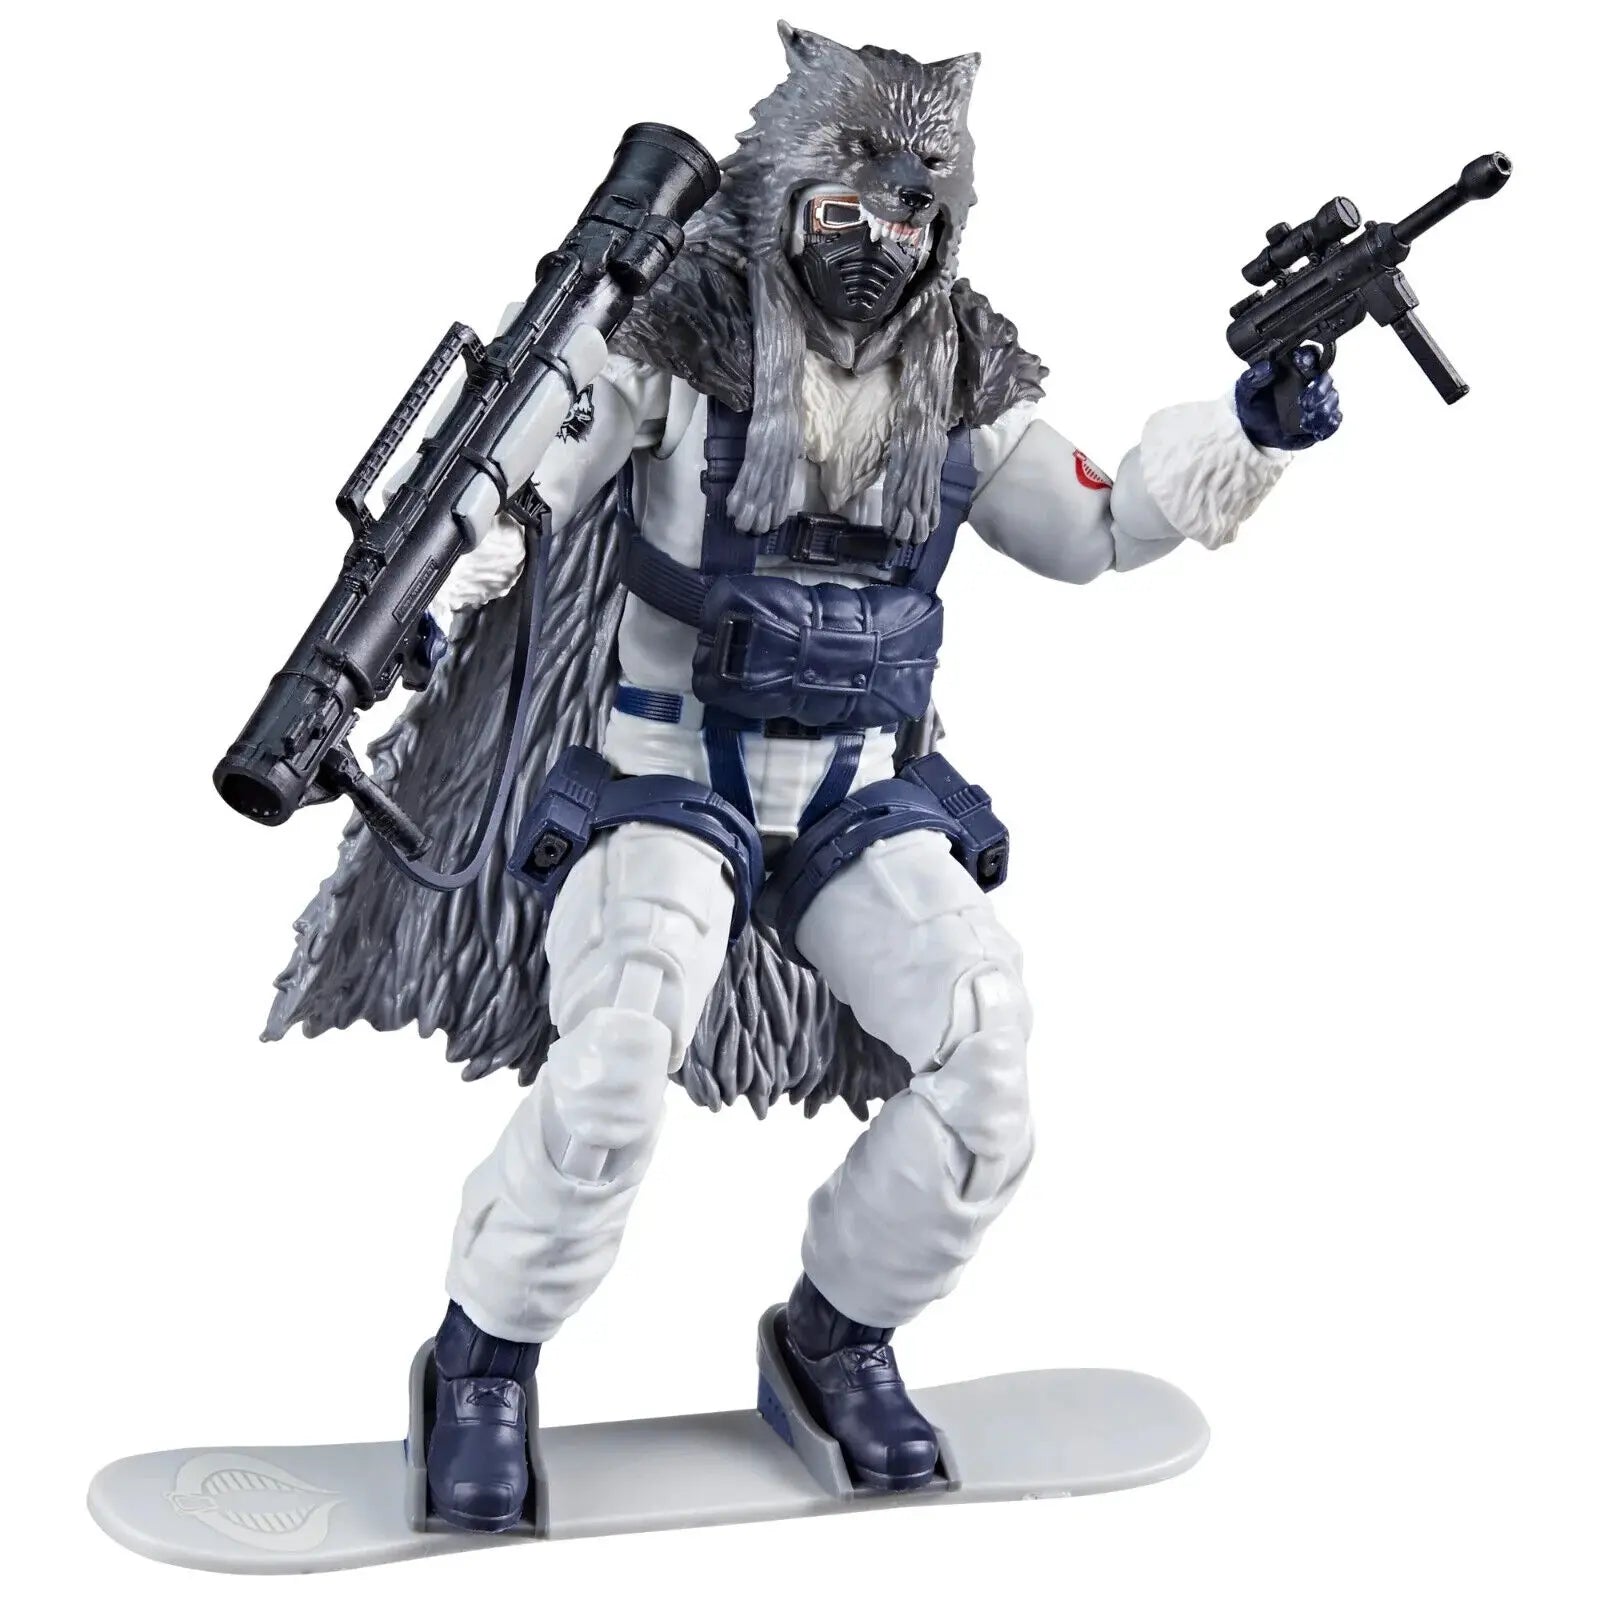 Hasbro G.I. Joe Classified Series 6'' Cobra Snow Serpent Deluxe Action Figure: A Frosty Force to Reckon With